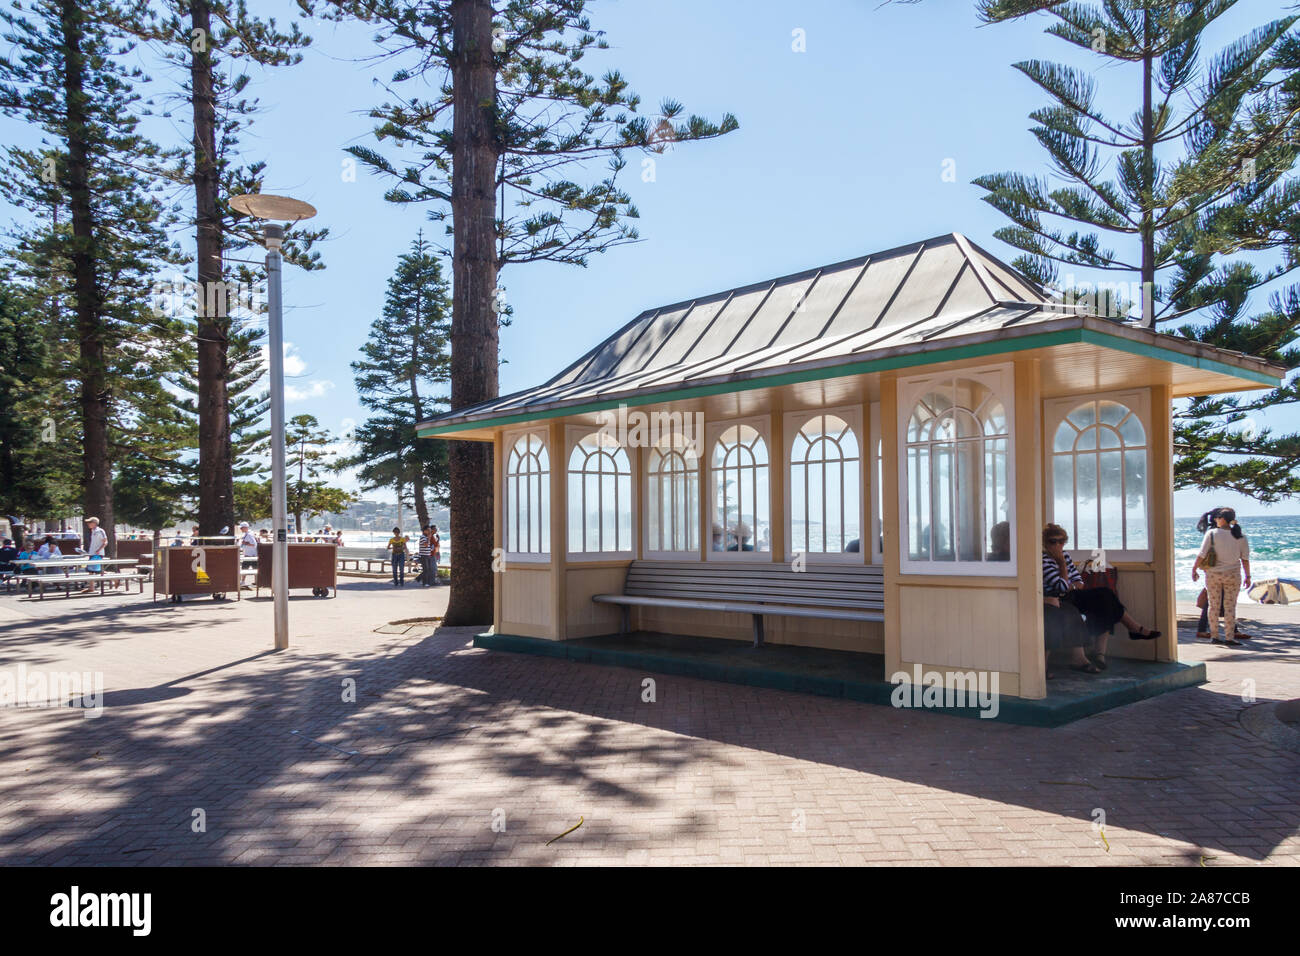 Manly, Australia - March 13th 2013: People resting in a shelter on the promenade. The shelter was erected in 1940 Stock Photo